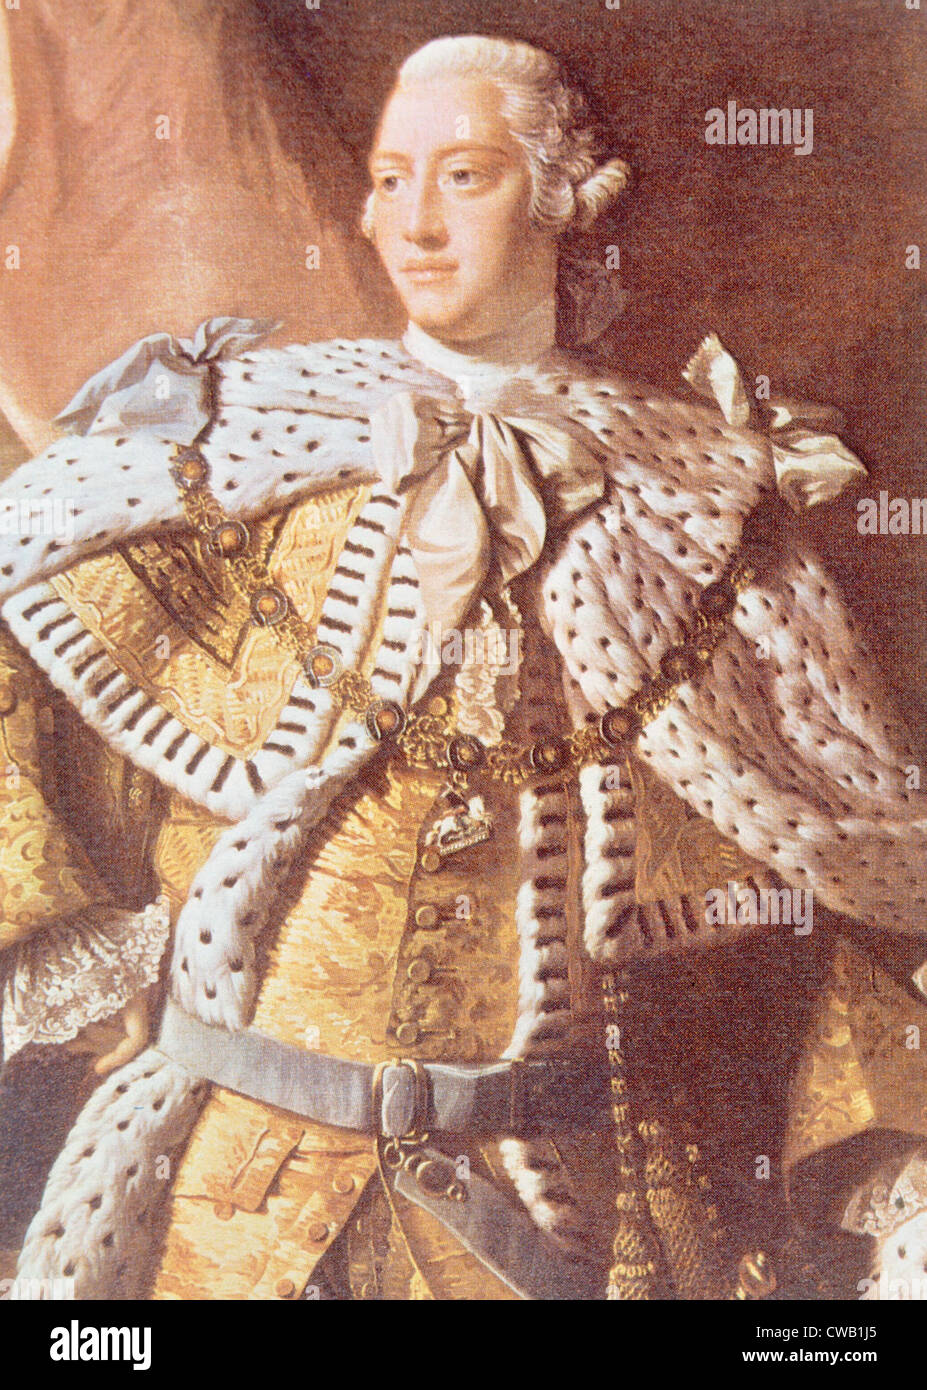 George III, (1738-1820), King of Great Britain and Ireland 1760-1801. Stock Photo